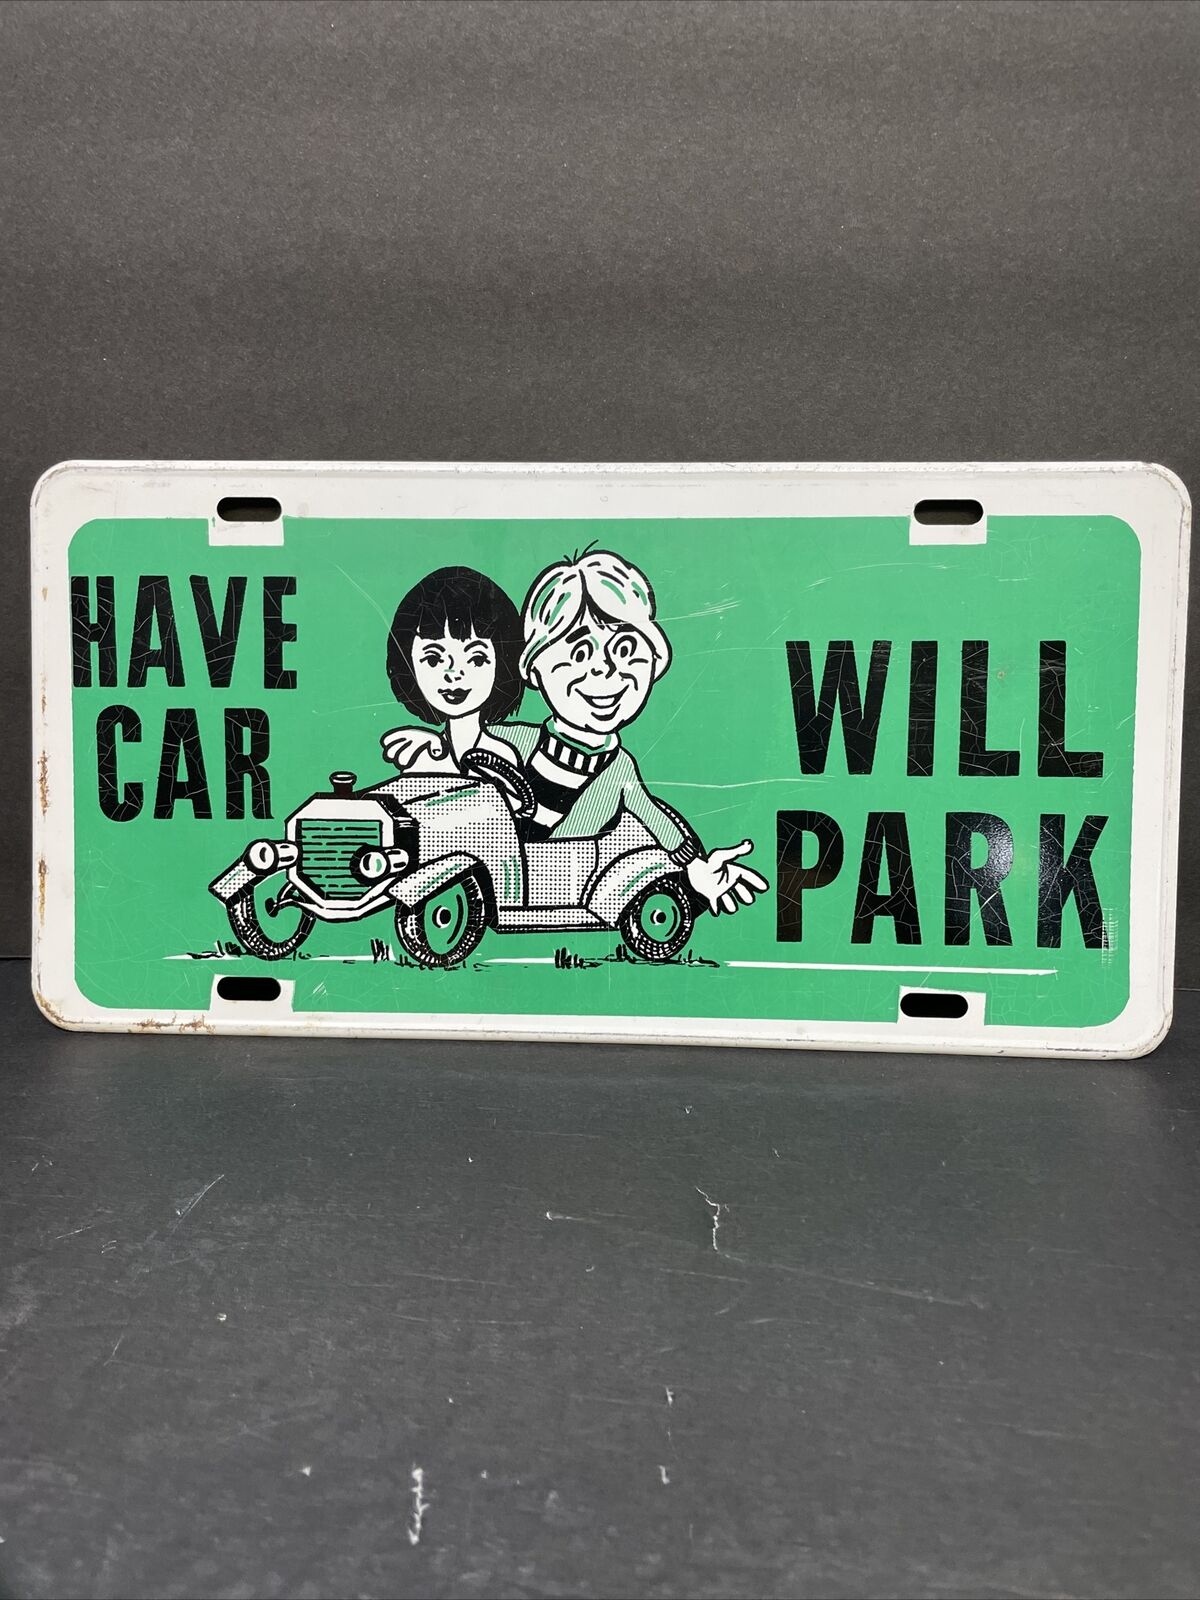 Authentic 1960s 1970s Have Car Will Park Booster License Plate Nice Sharp Color